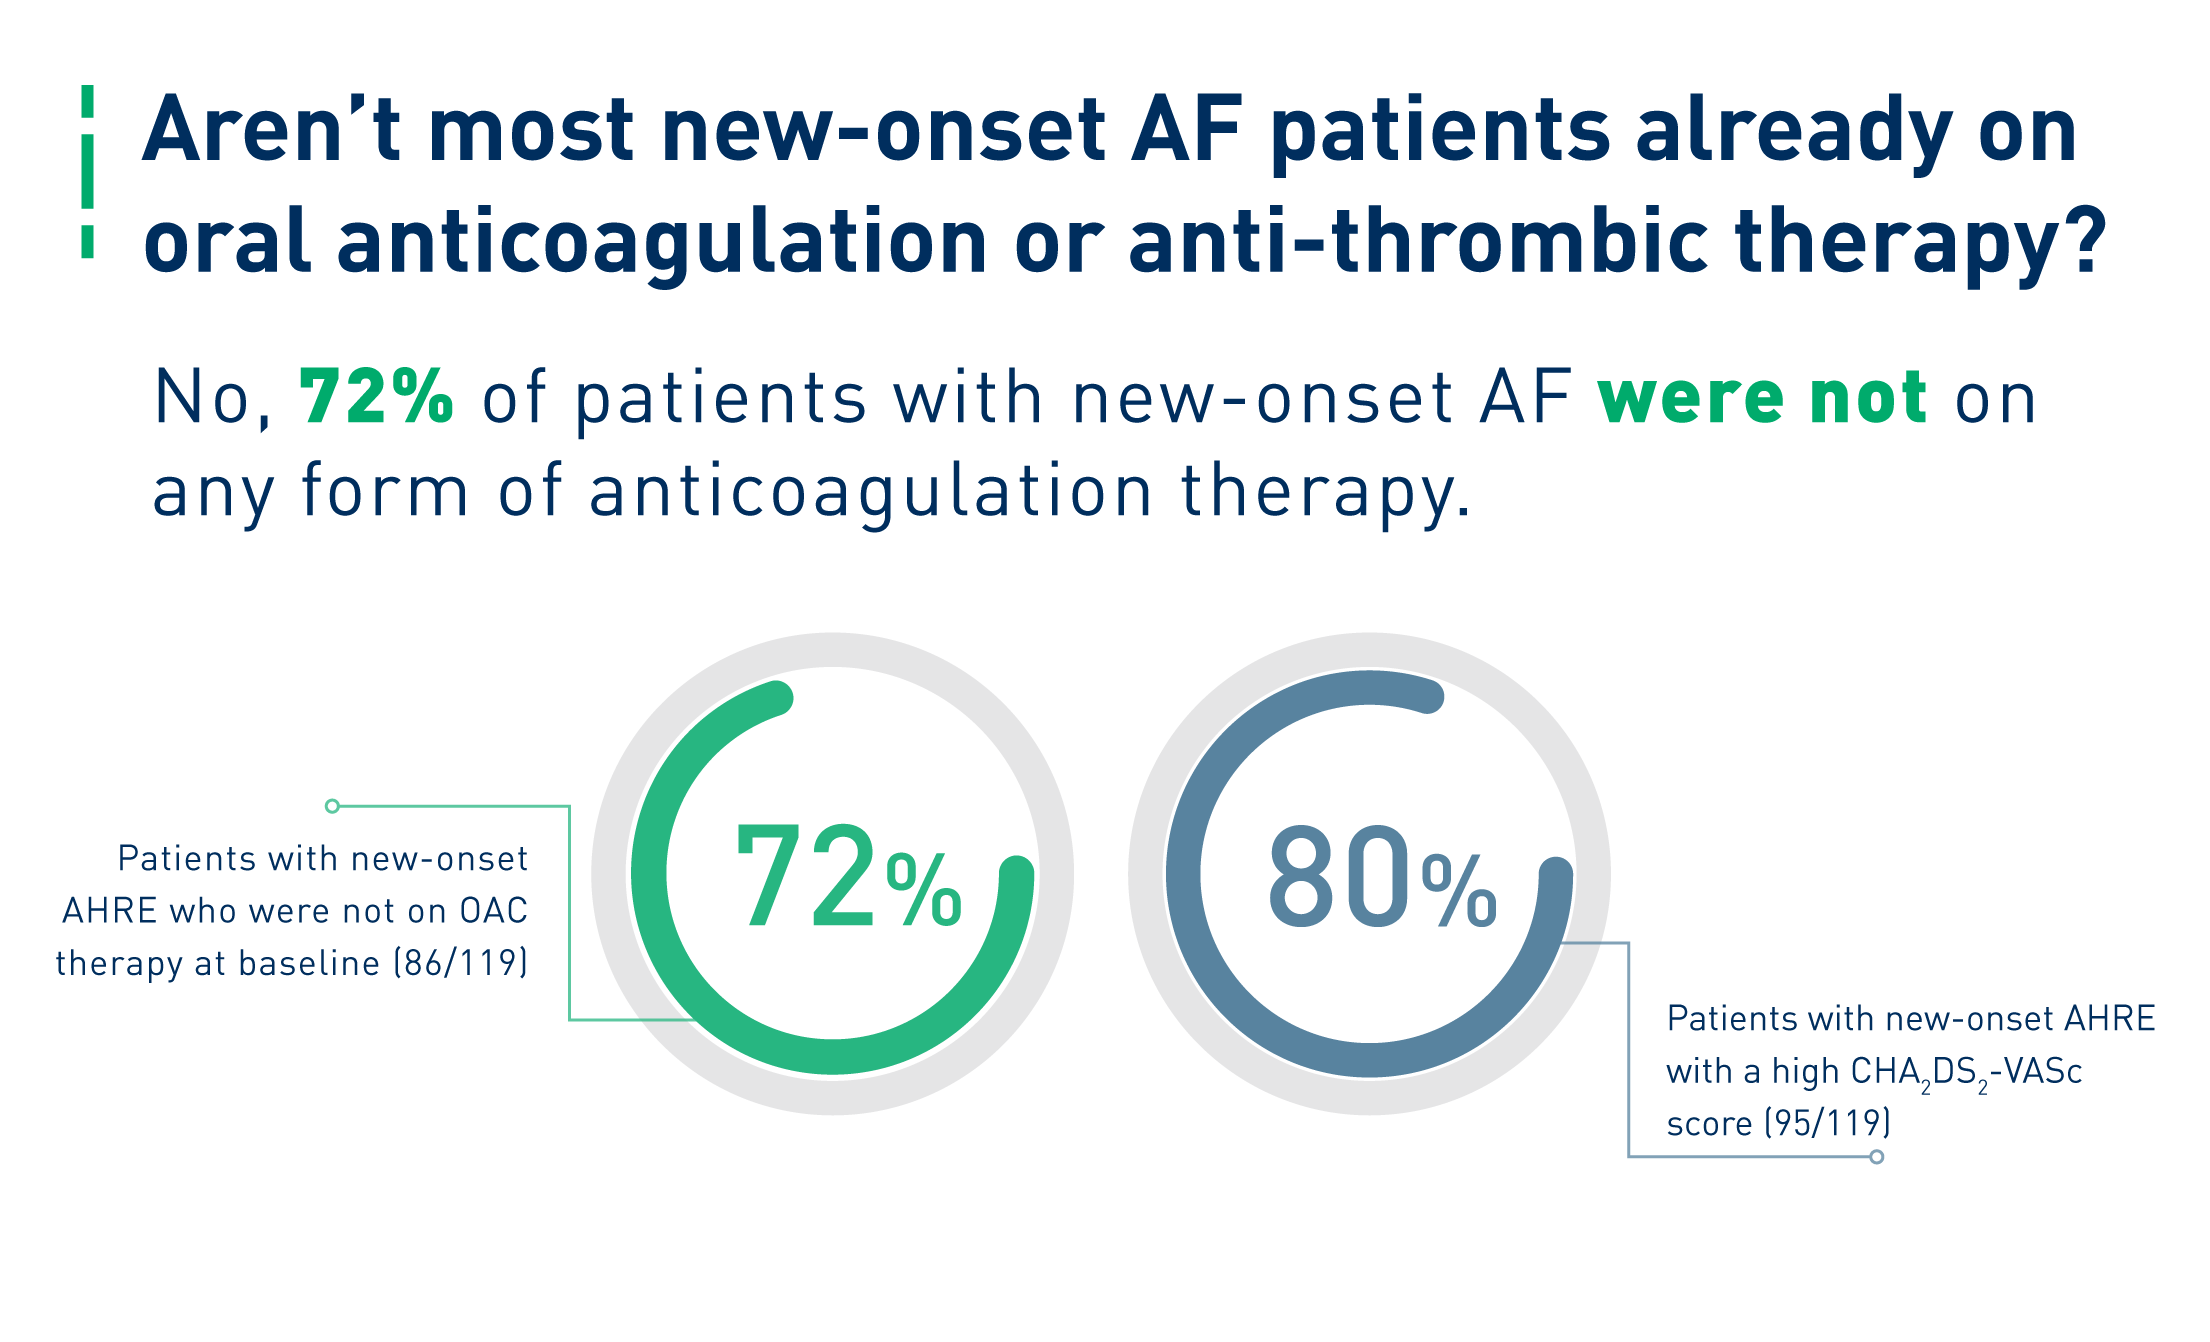 Aren’t most new-onset AF patients already on  oral anticoagulation or anti-thrombic therapy?